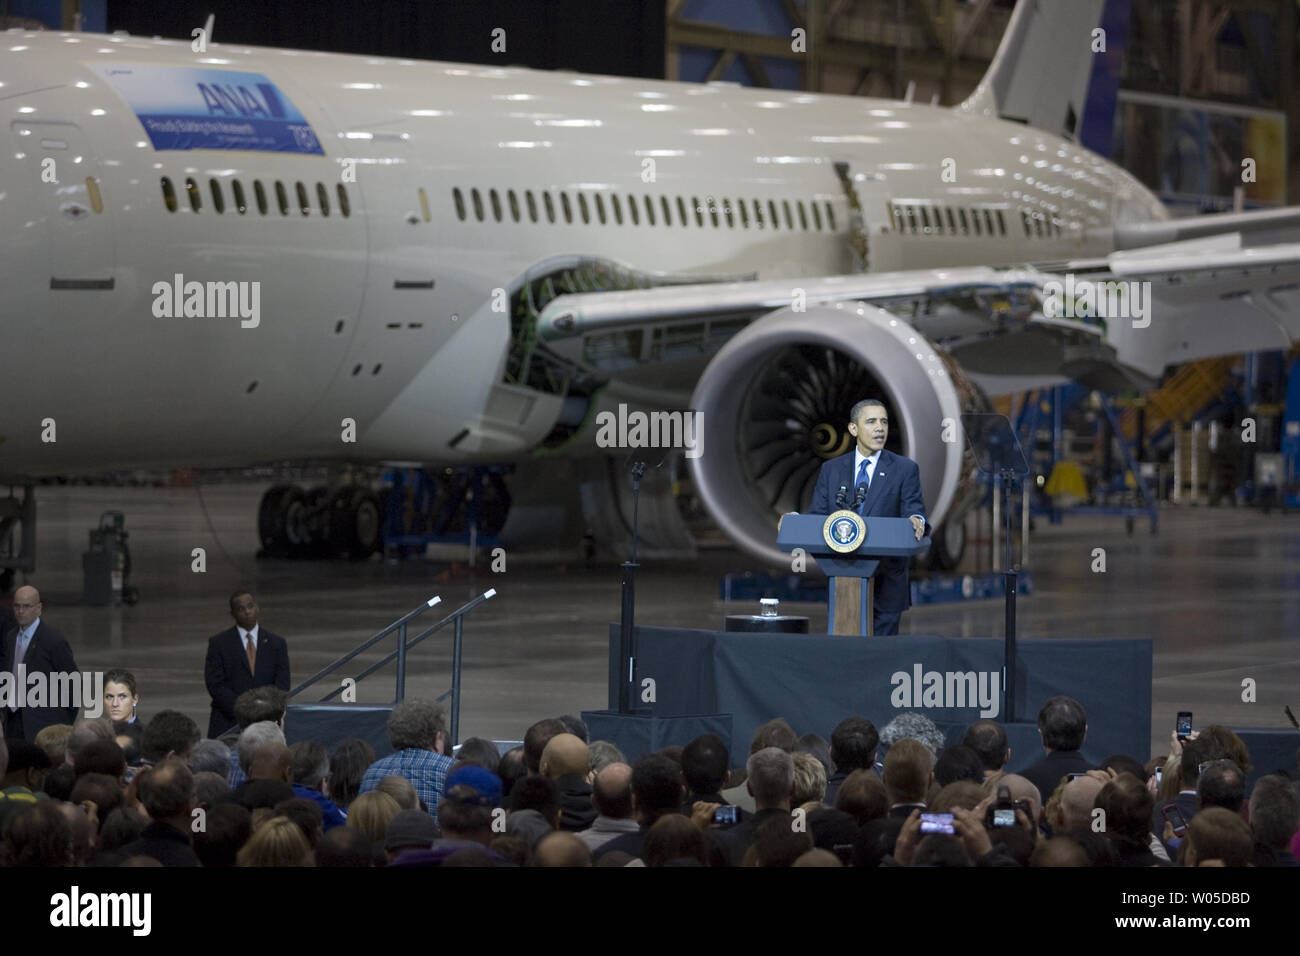 President Barack Obama speaks to Boeing employees about his blueprint for an economy built to last, based on American domestic manufacturing and promoting American exports,  at the aerospace giant's assembly facility in Everett, Washington on February 17, 2012. Later Obama will be attending two fund raising events for his re-election campaign.   UPI/Jim Bryant Stock Photo